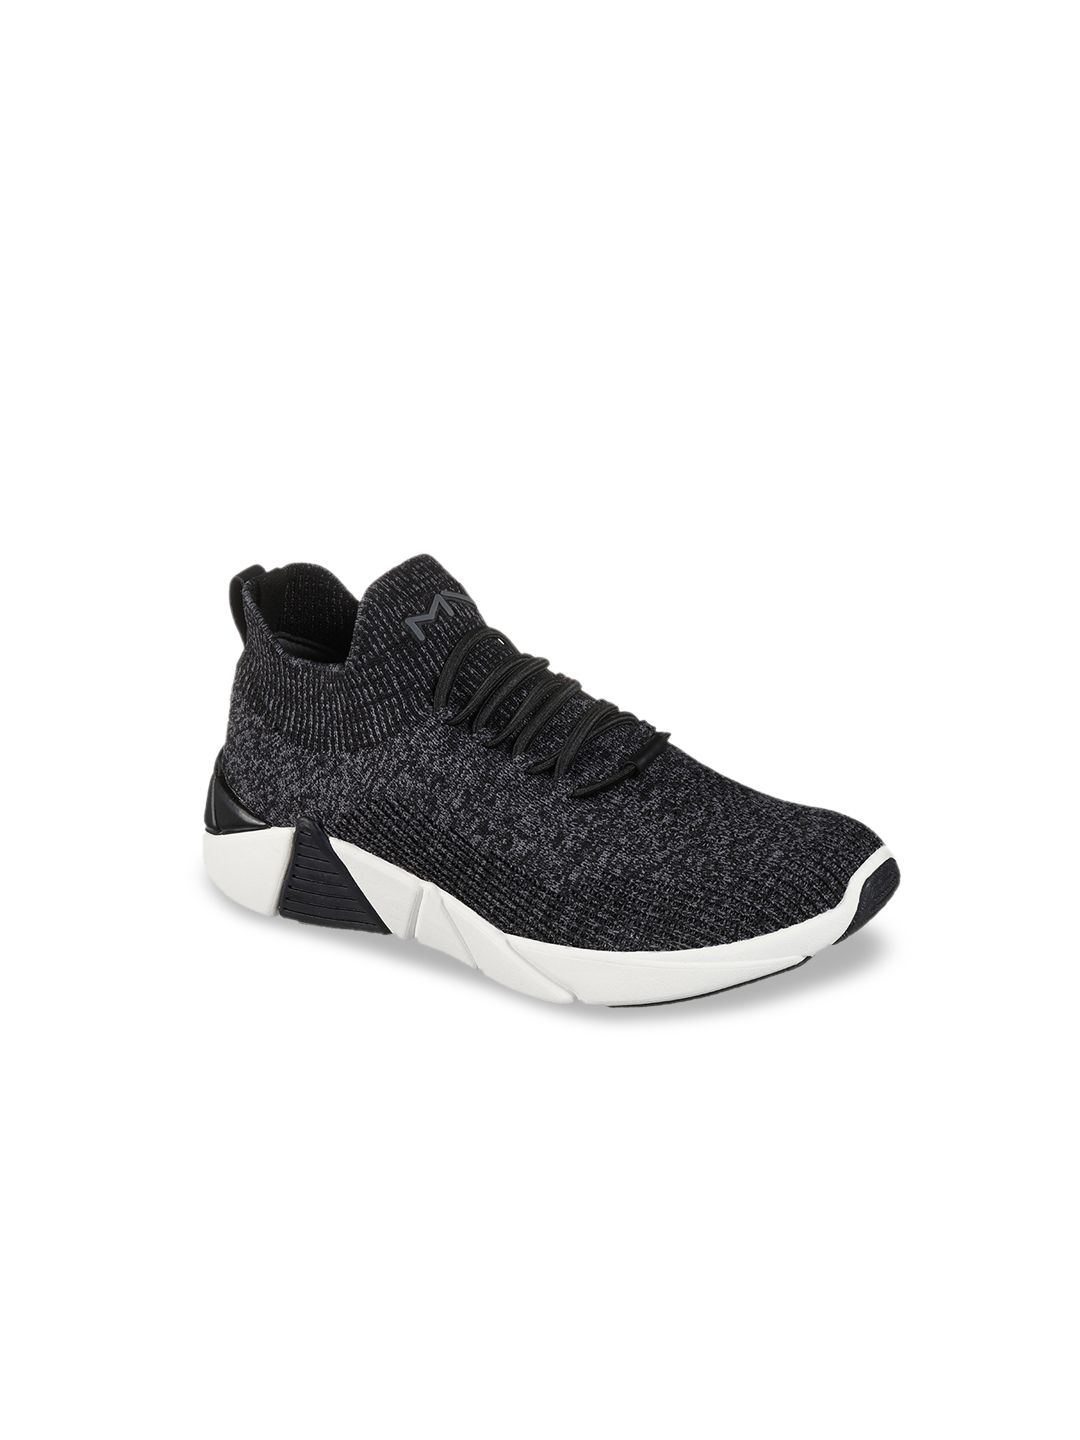 Skechers Women Black Lace-Up Sneaker Casual Shoes Price in India